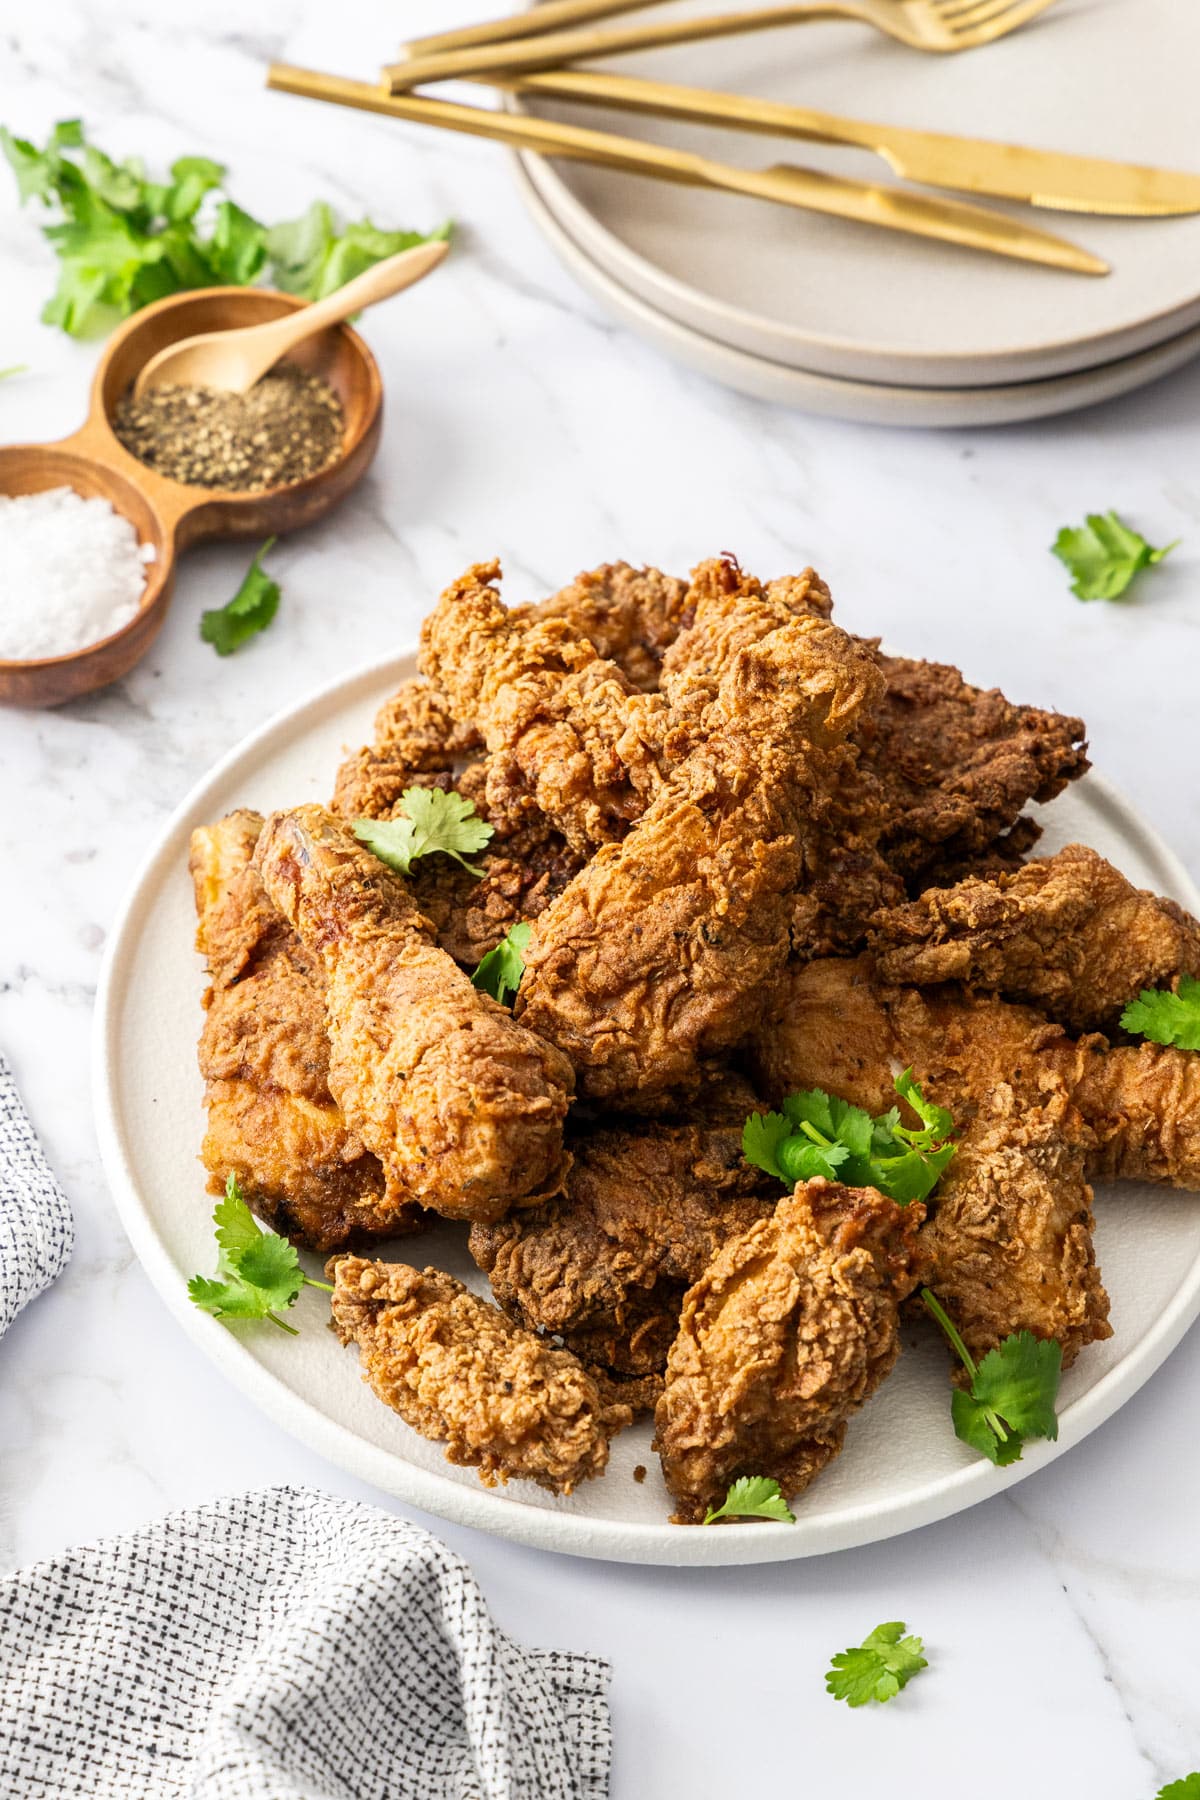 a plate of fried chicken on a table with plates and napkins.